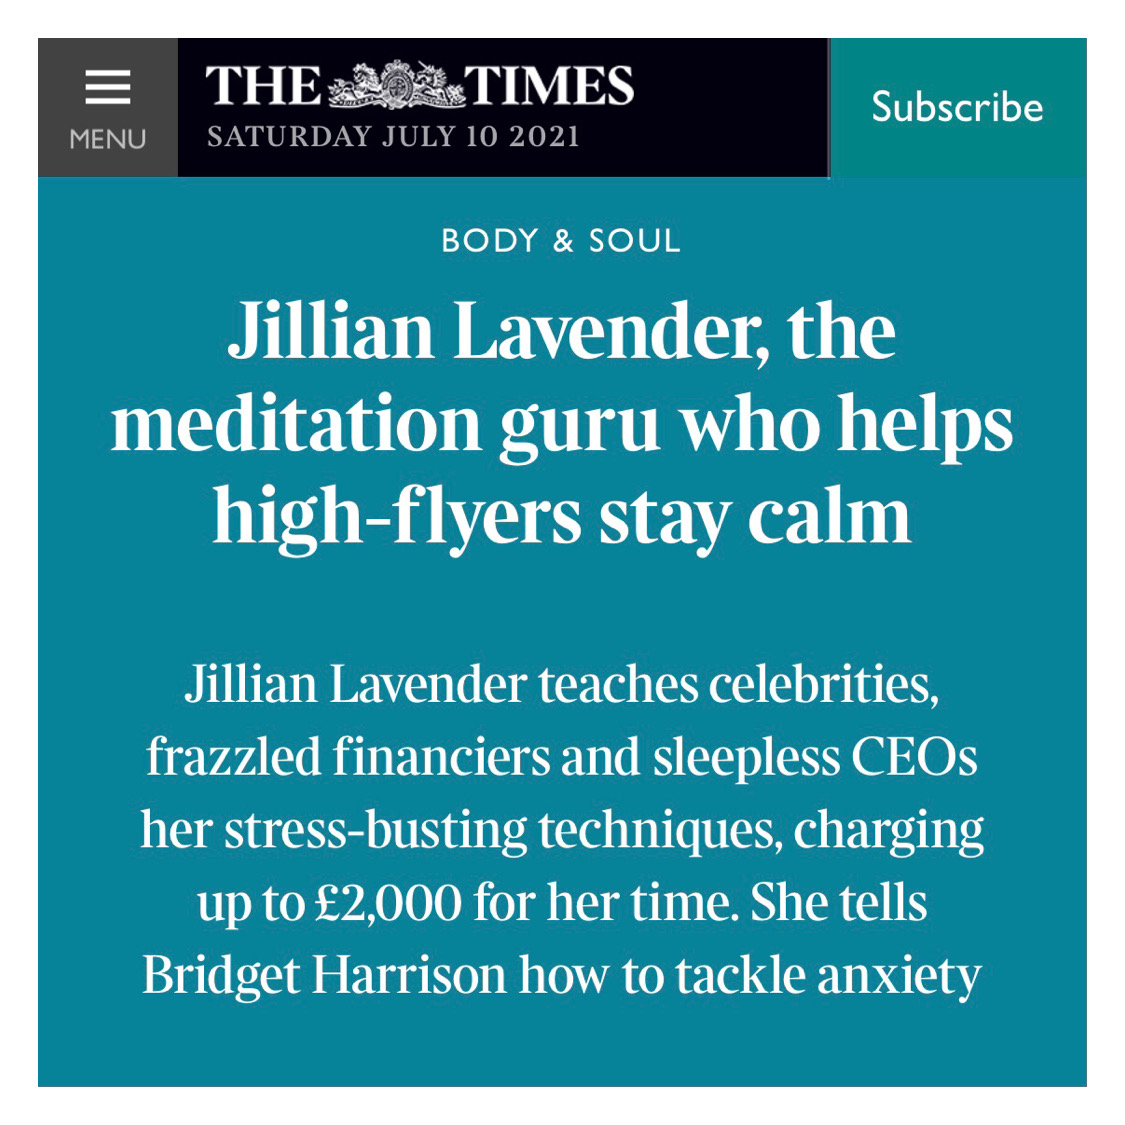 Exciting to see @JillianLavender featured in The London Times @thetimes today, discussing why the deep rest of #VedicMeditation is such a vital antidote to the stress and demands of our busy lives.

#whymeditatebecauseitworks

thetimes.co.uk/article/jillia…